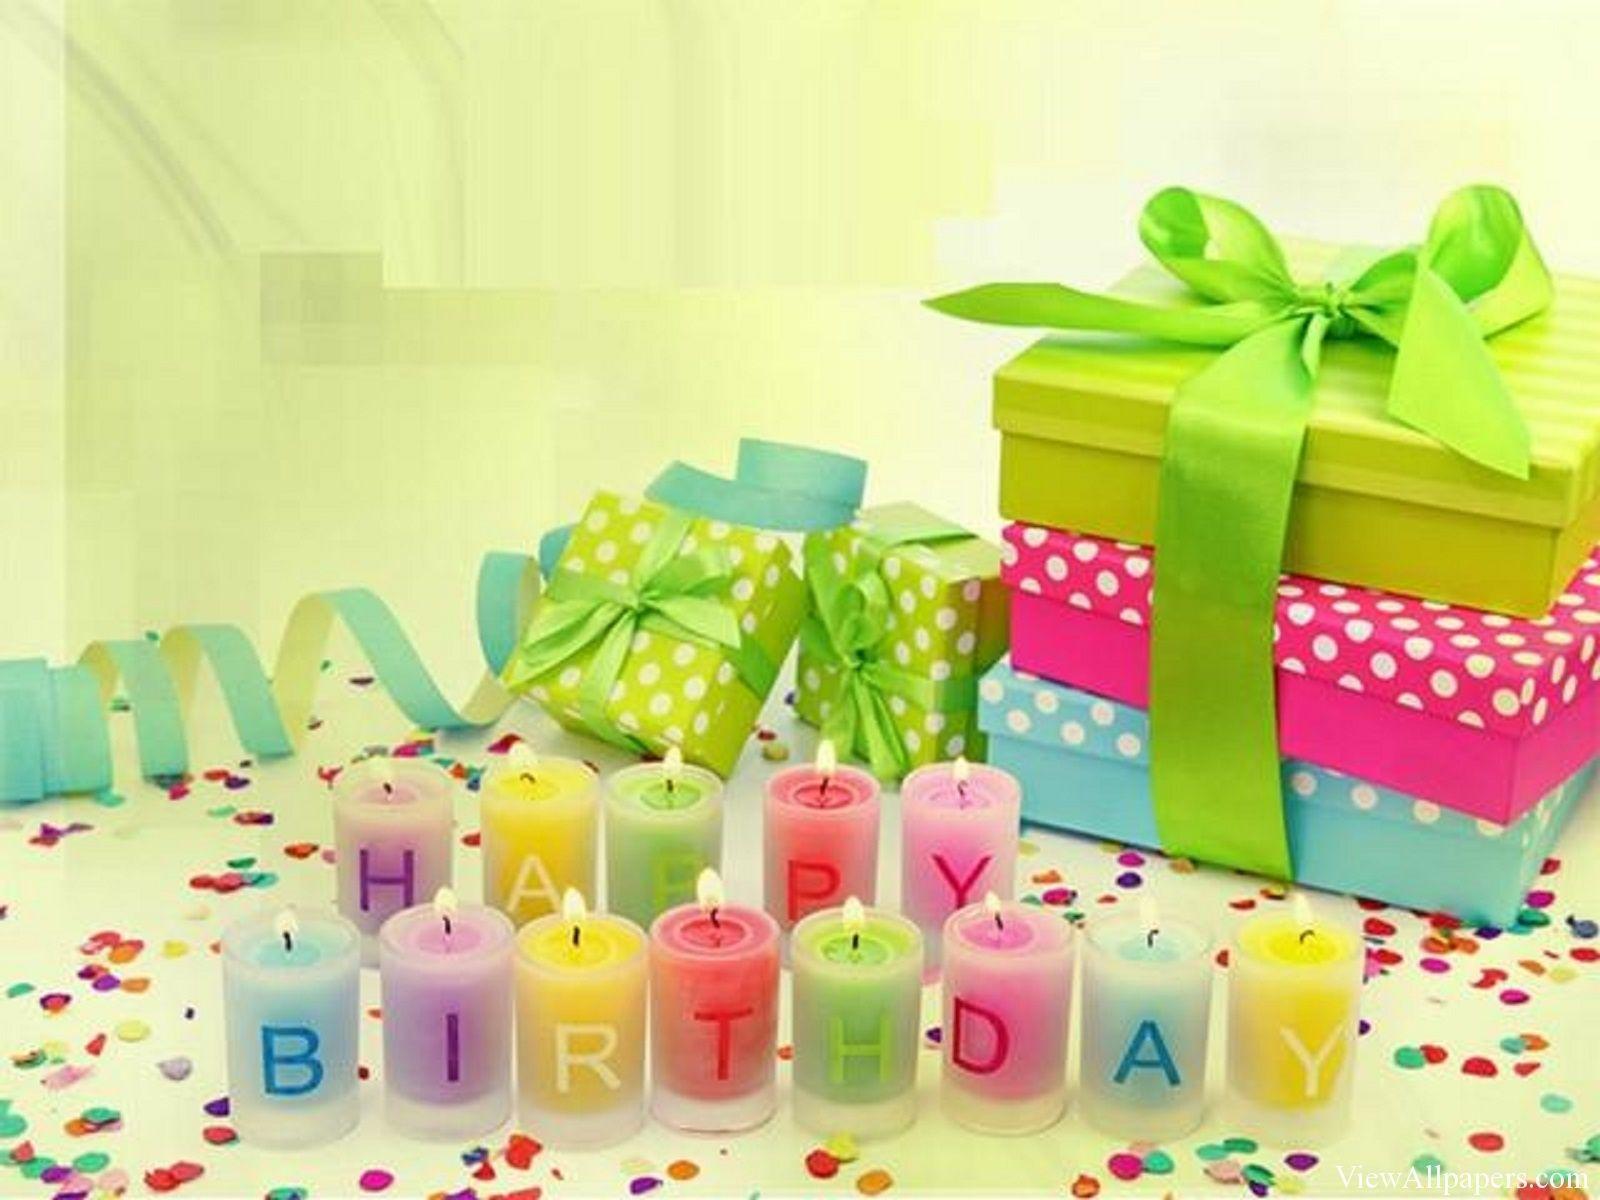 Happy Birthday Candles And Presents. Birthday HD Wallpaper